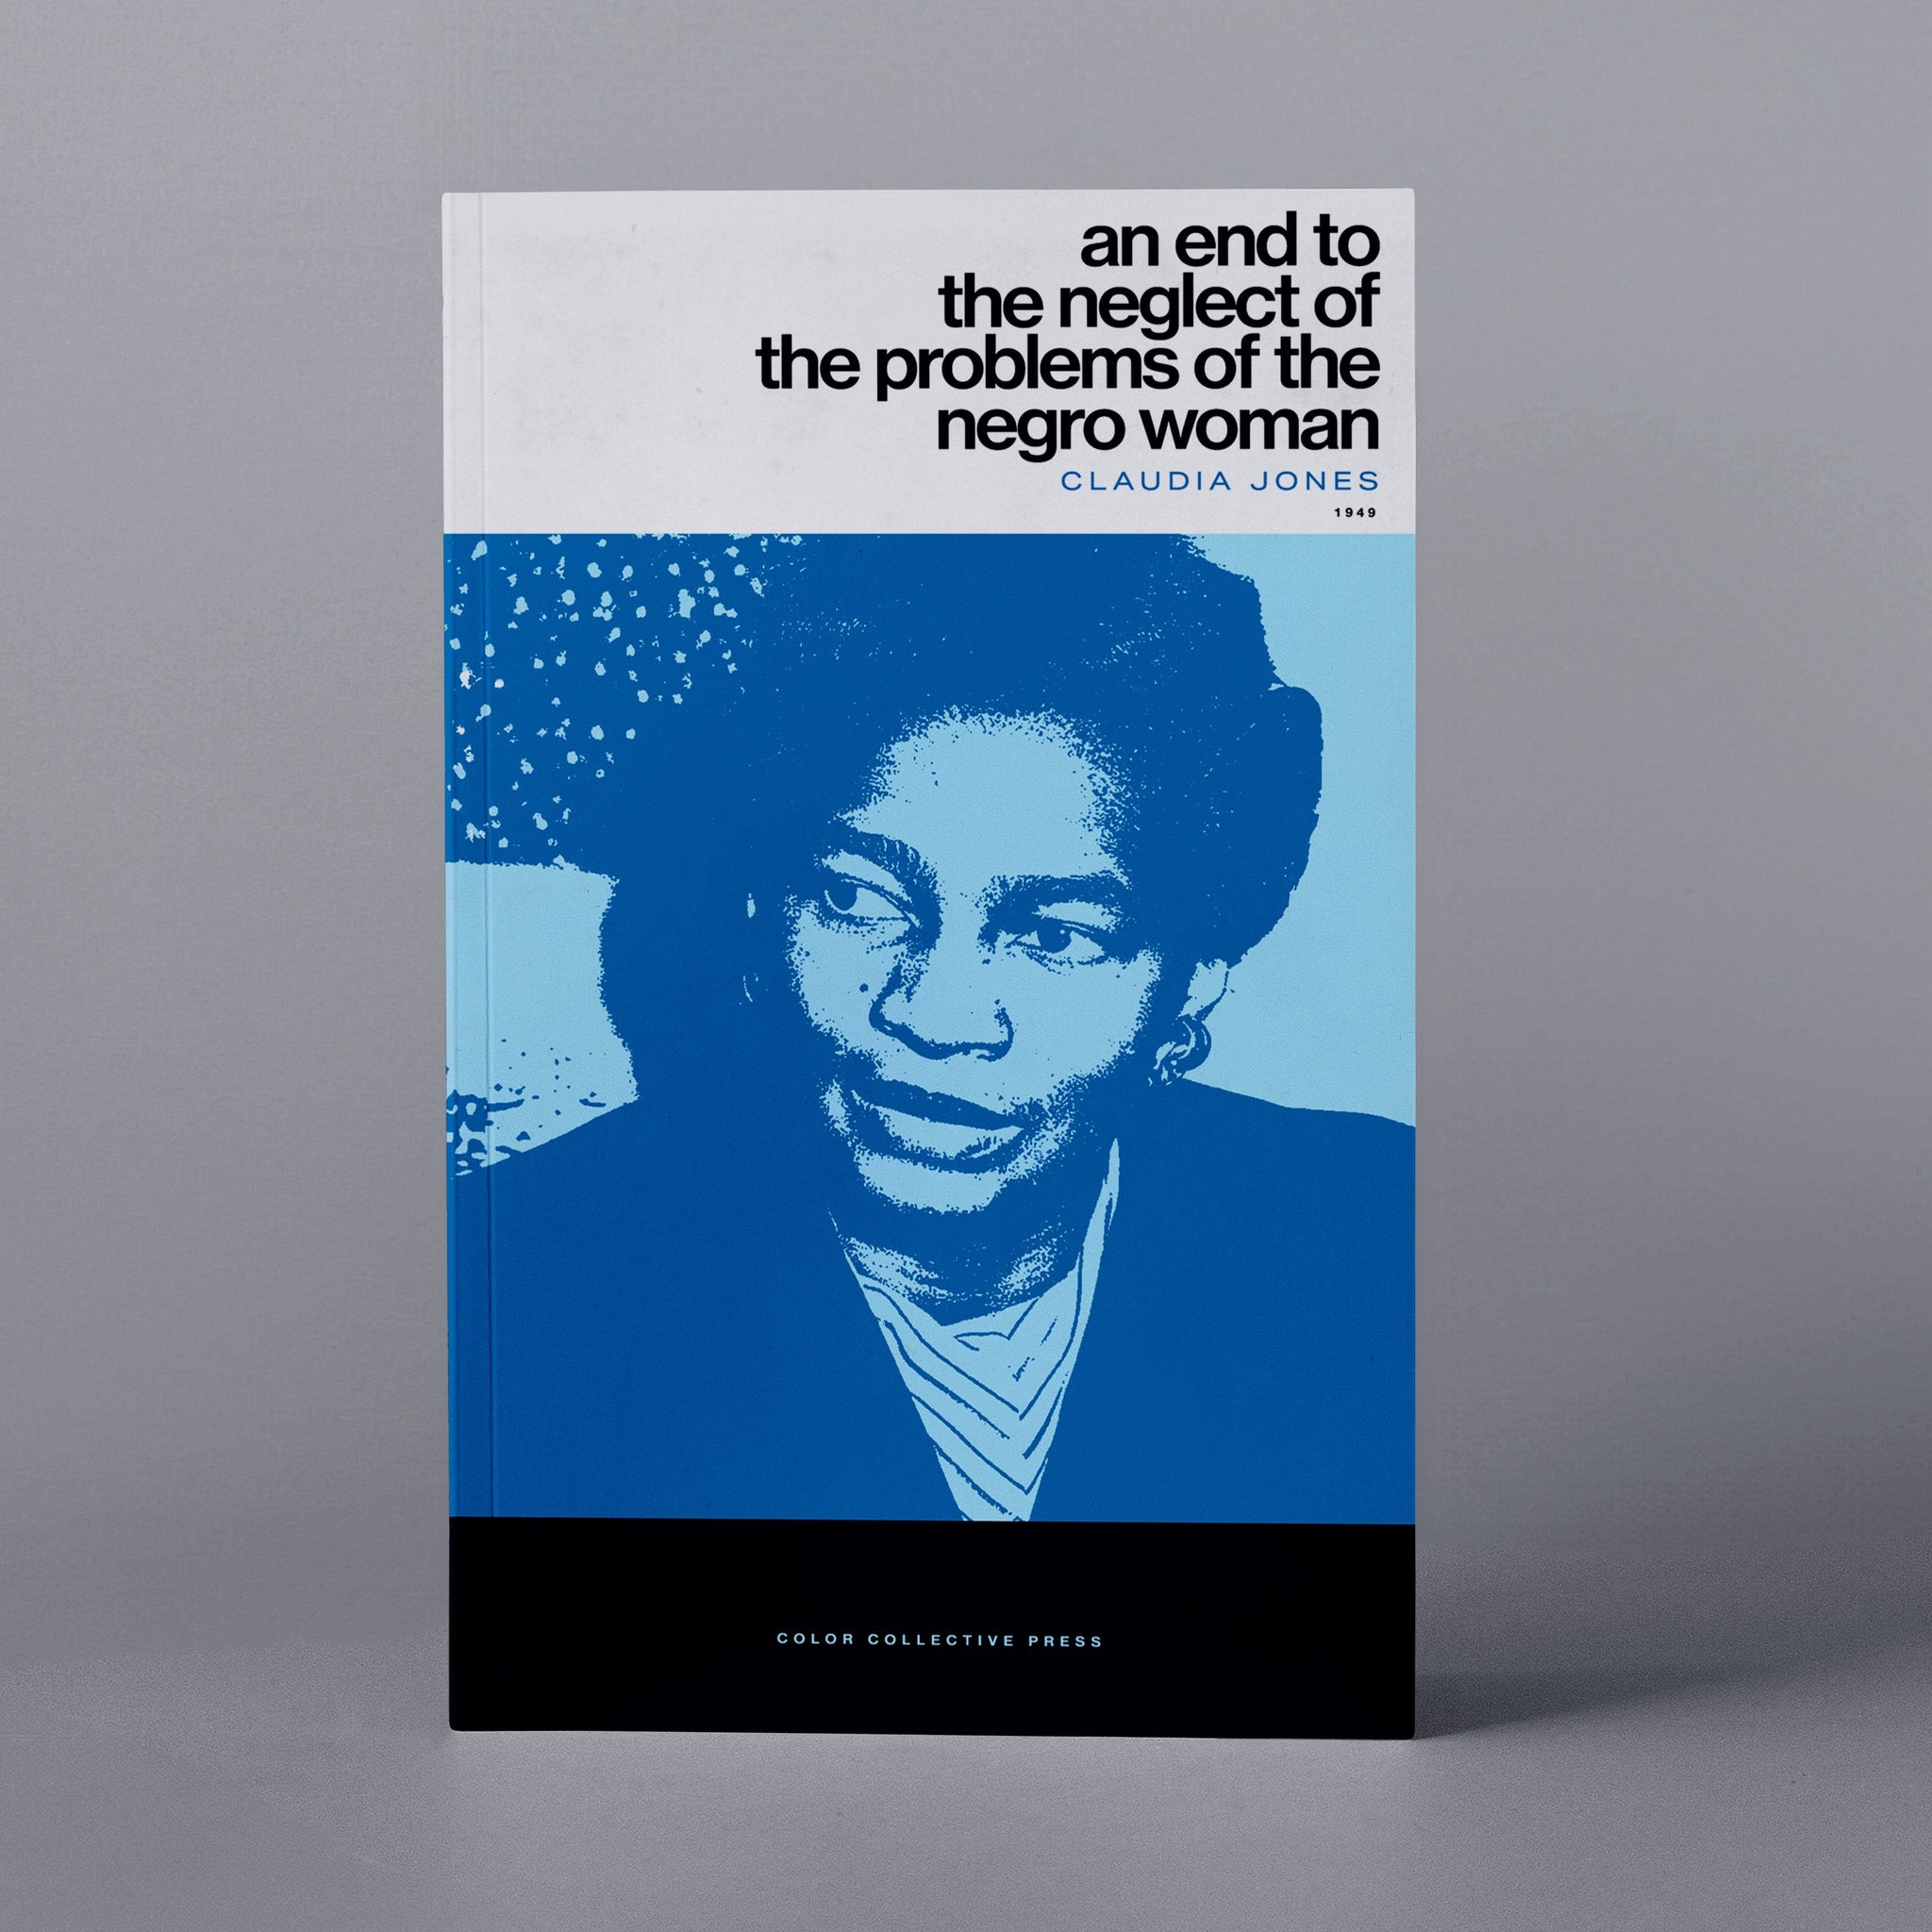 1949: An End to the Neglect of the Problems of the Negro Woman (Claudia Jones)